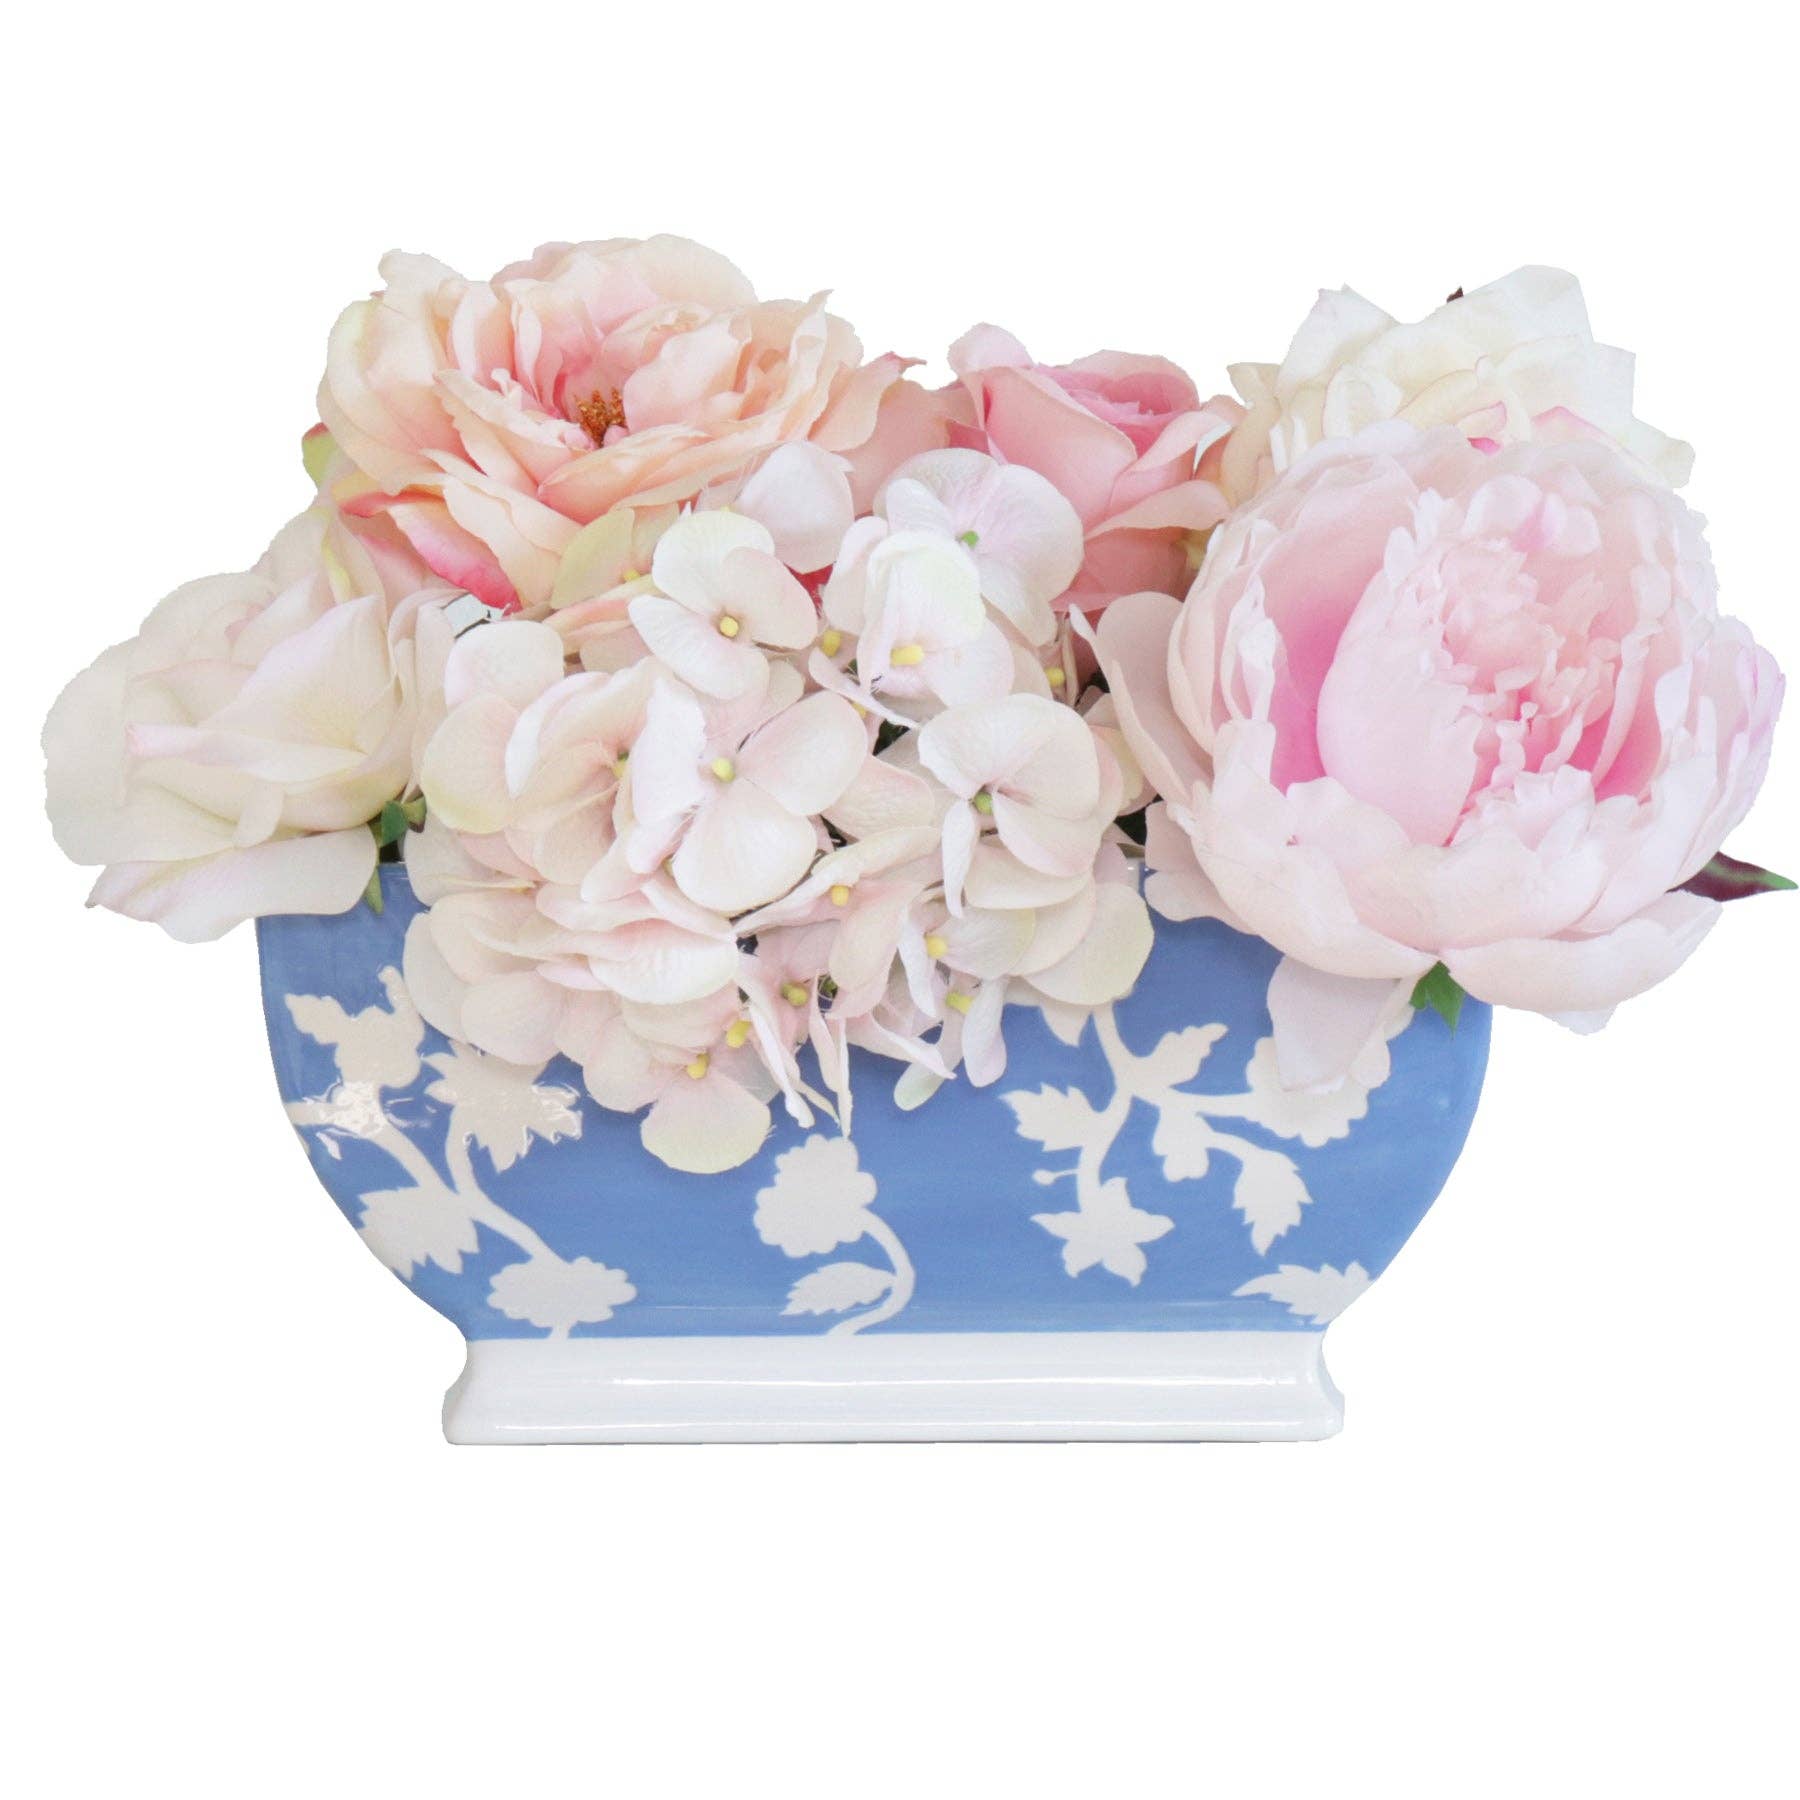 Lo Home by Lauren Haskell Designs Chinoiserie Dreams Planter: Serenity Blue - Little Birdies